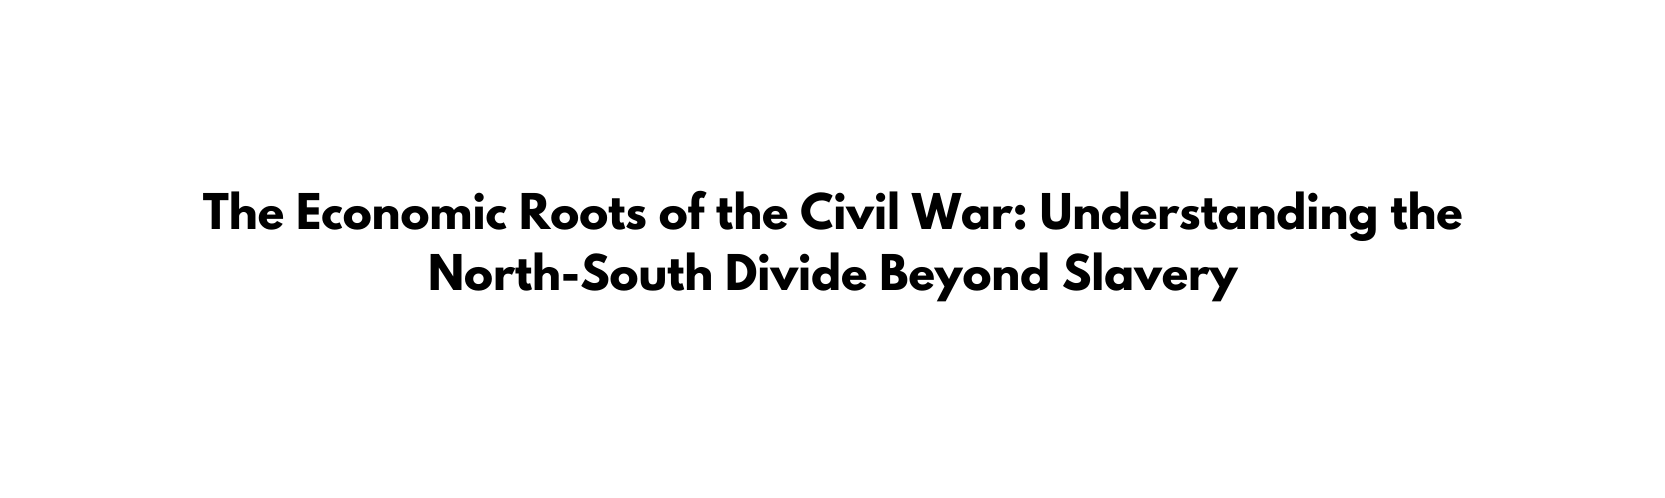 The Economic Roots of the Civil War Understanding the North South Divide Beyond Slavery